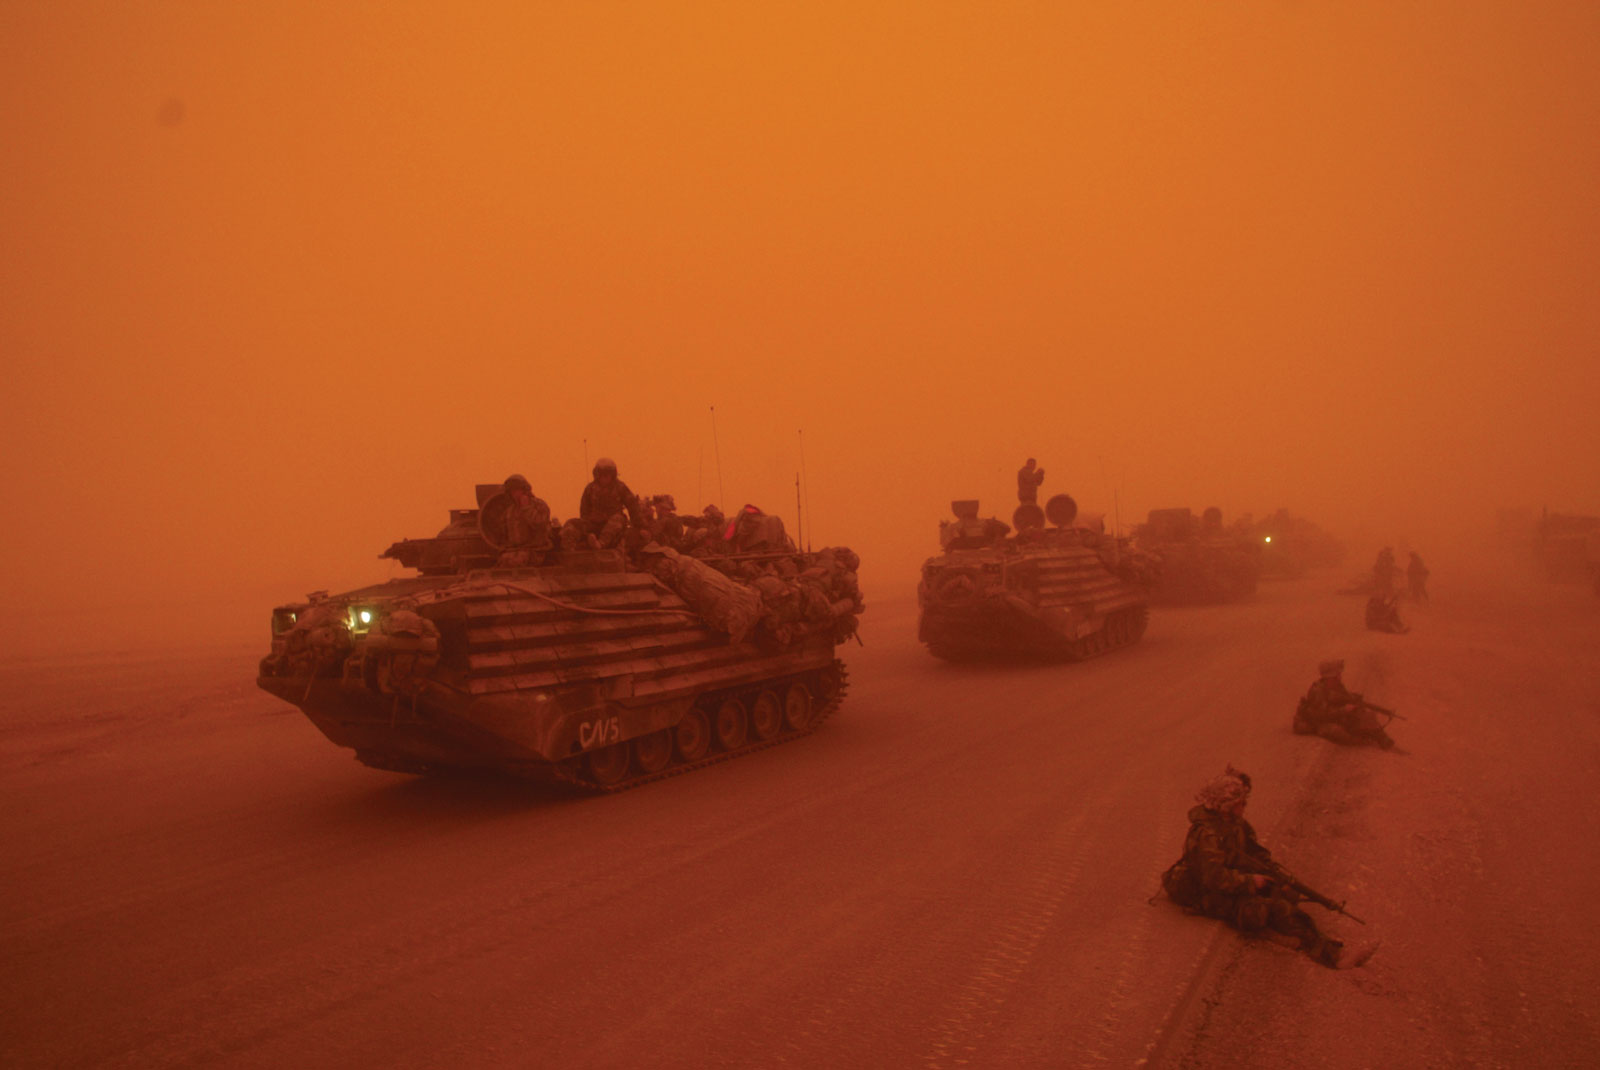 A US Marine convey, north of the Euphrates, Iraq; photograph published in The New York Times on March 26, 2003, and included in War is Beautiful